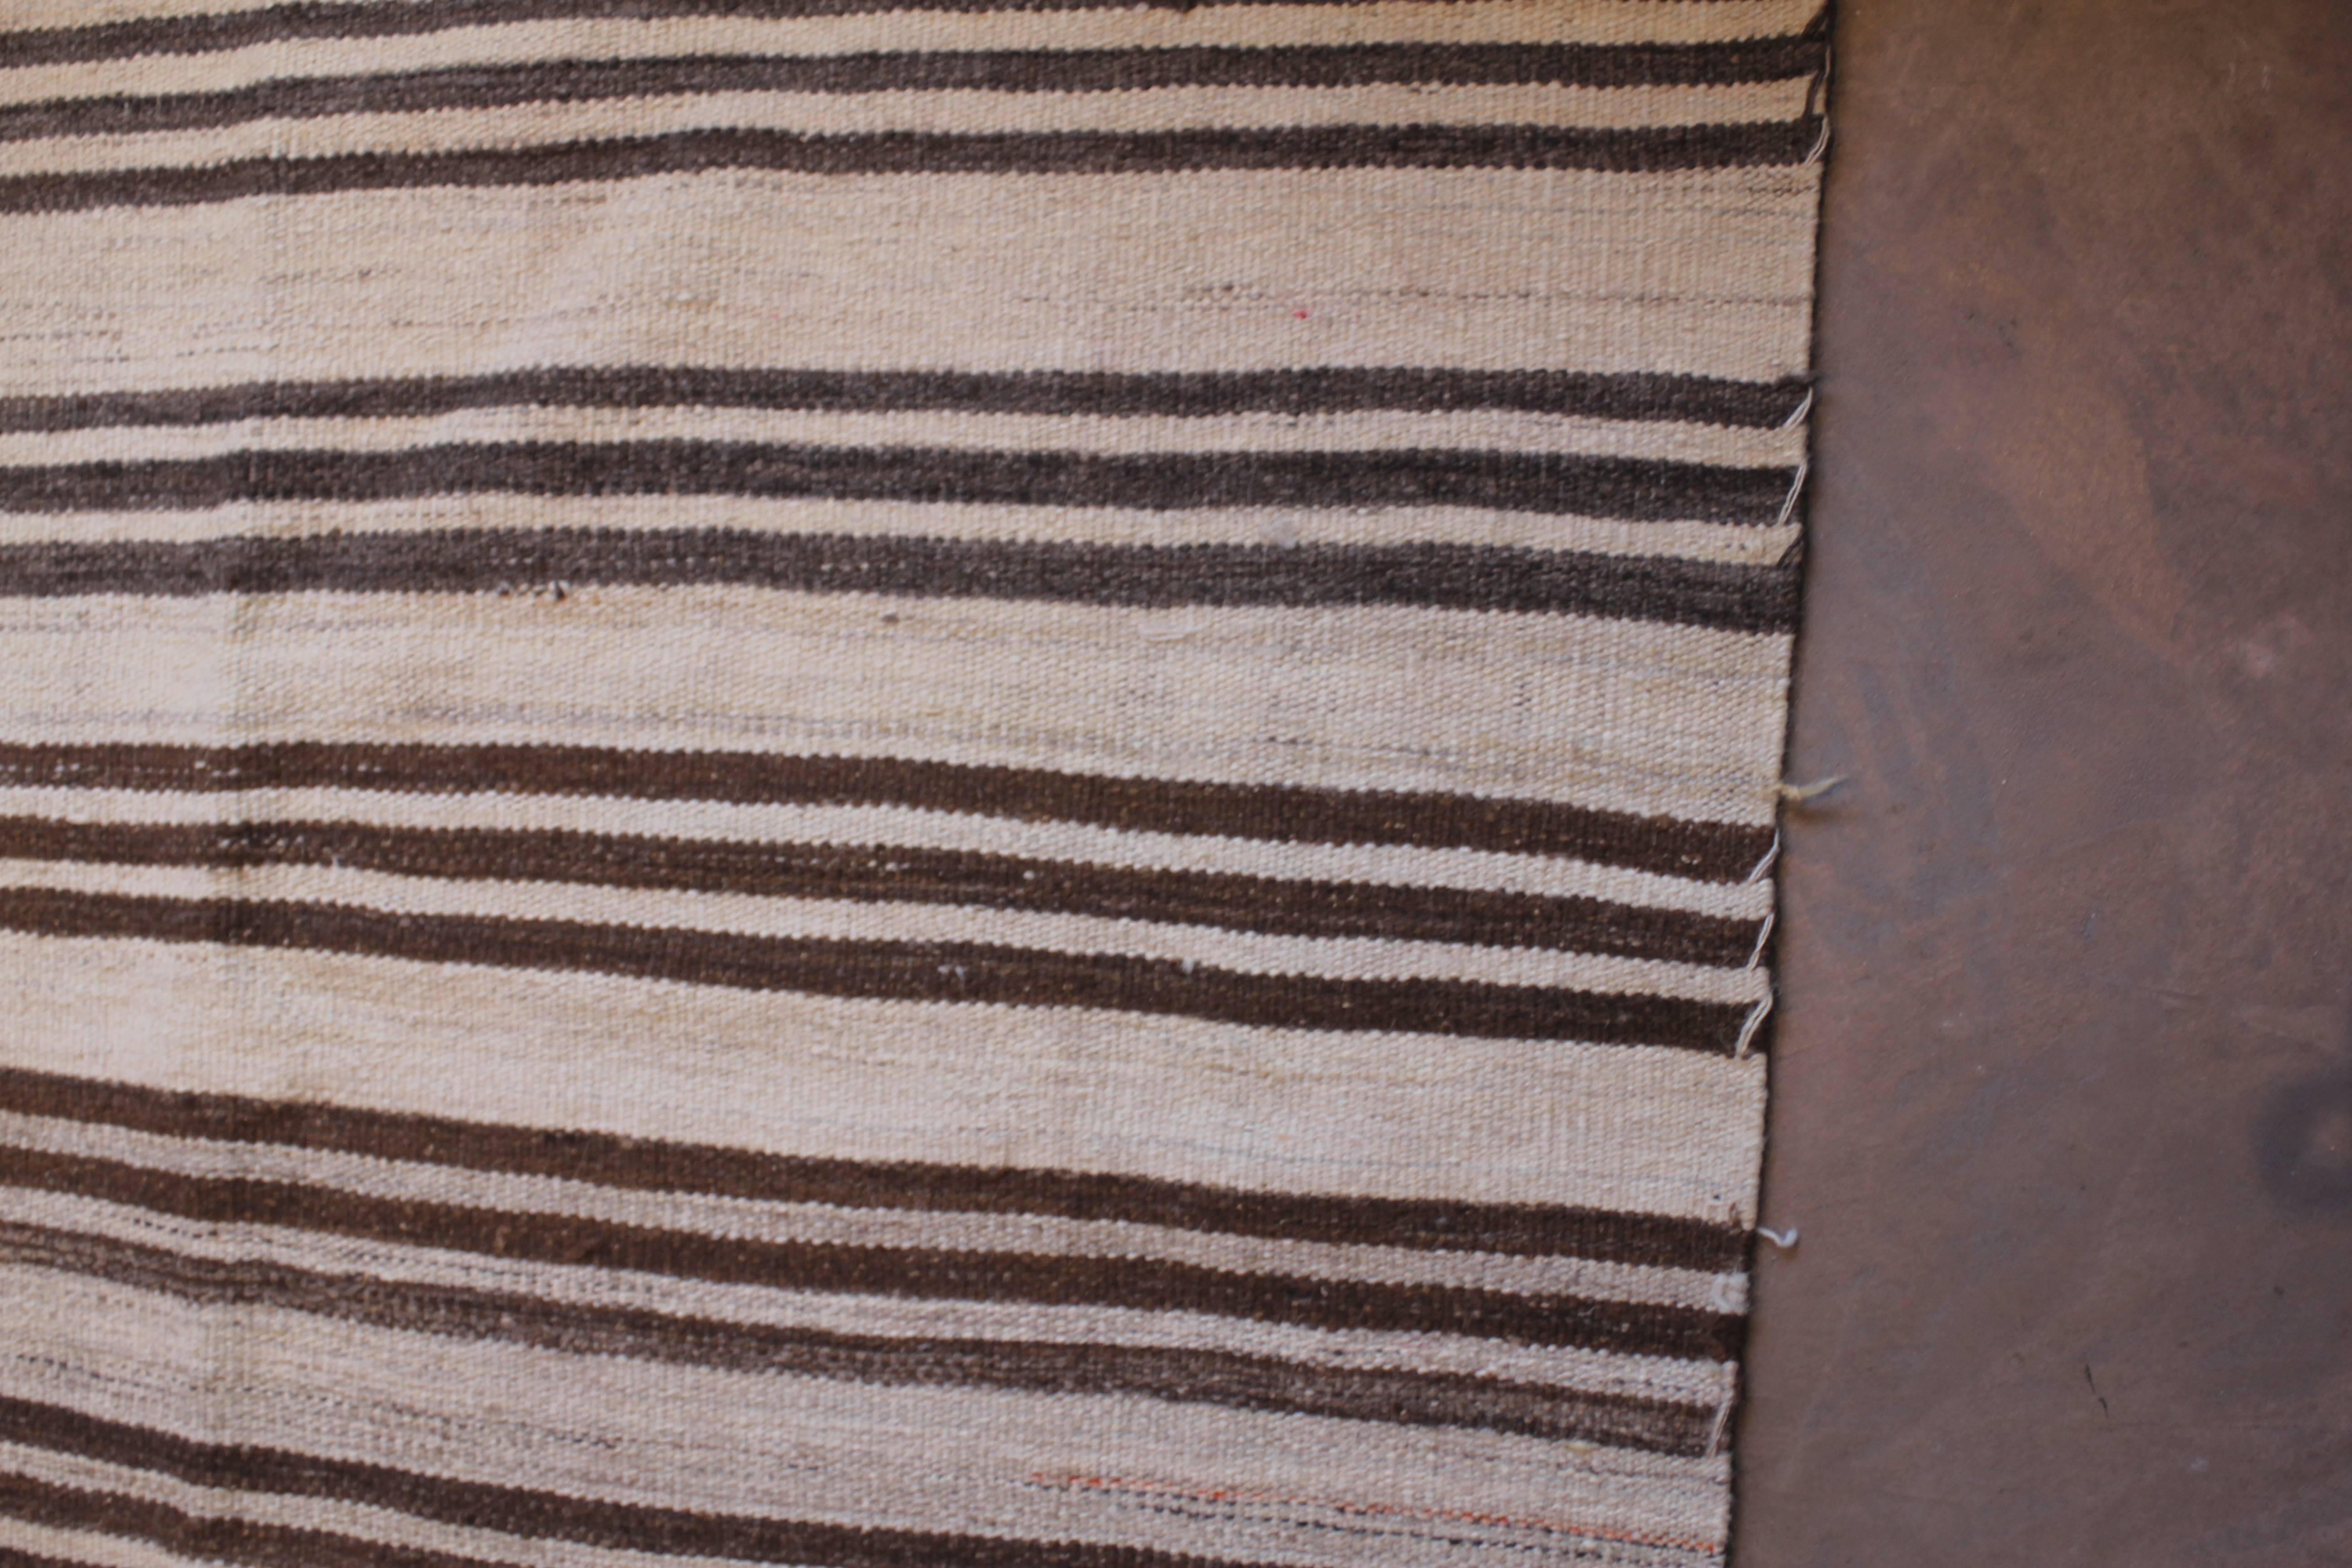 Hand-Knotted 20th Century Turkish Striped Flat-Weave Kilim